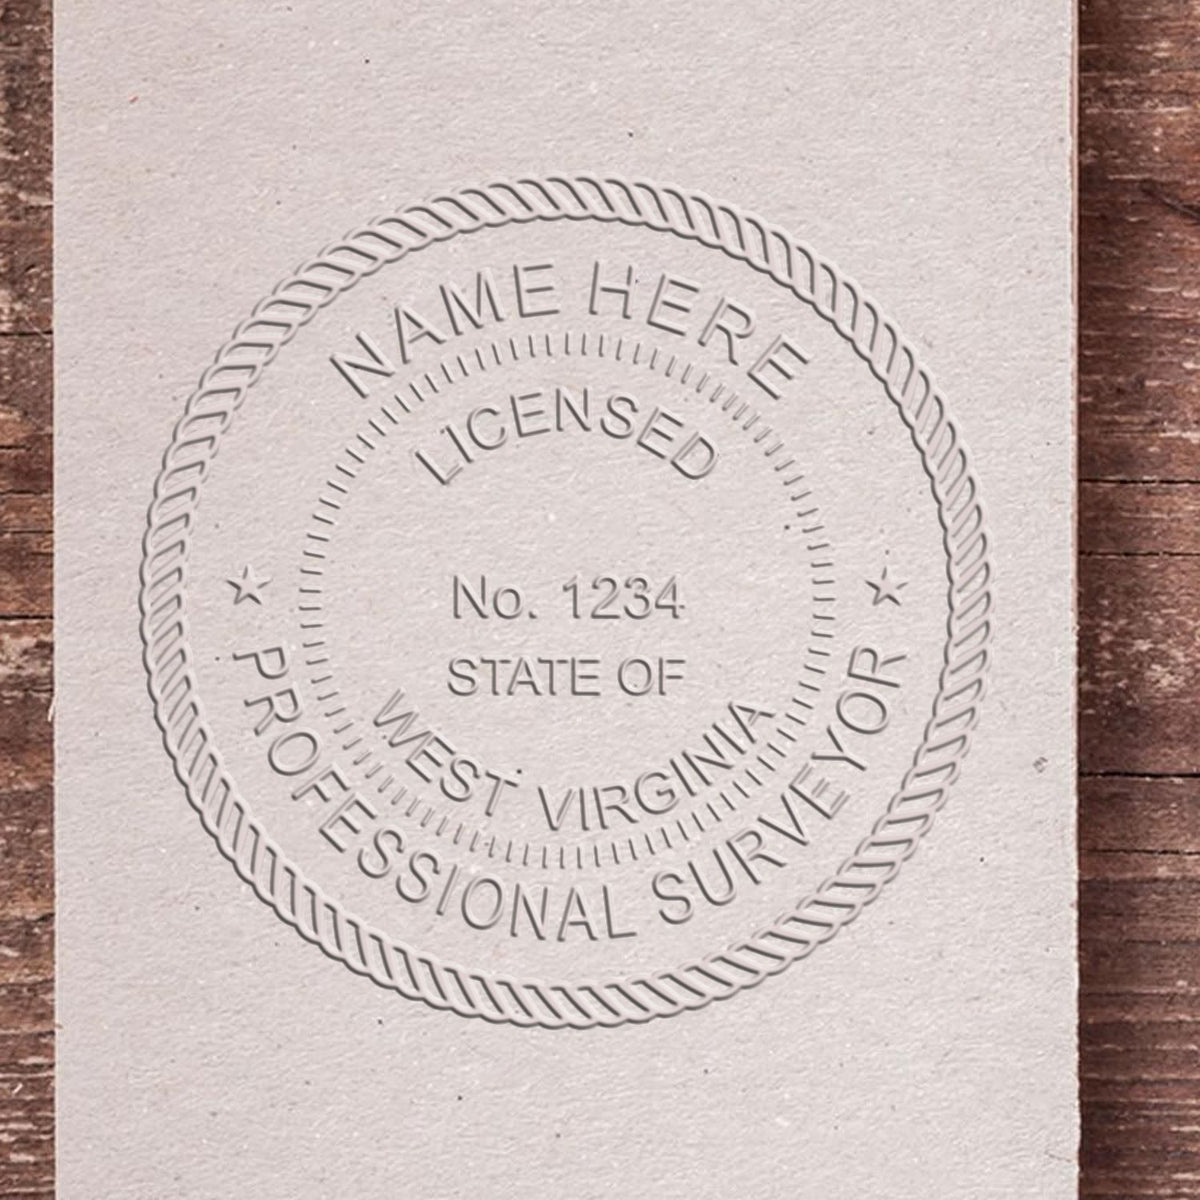 A photograph of the Hybrid West Virginia Land Surveyor Seal stamp impression reveals a vivid, professional image of the on paper.